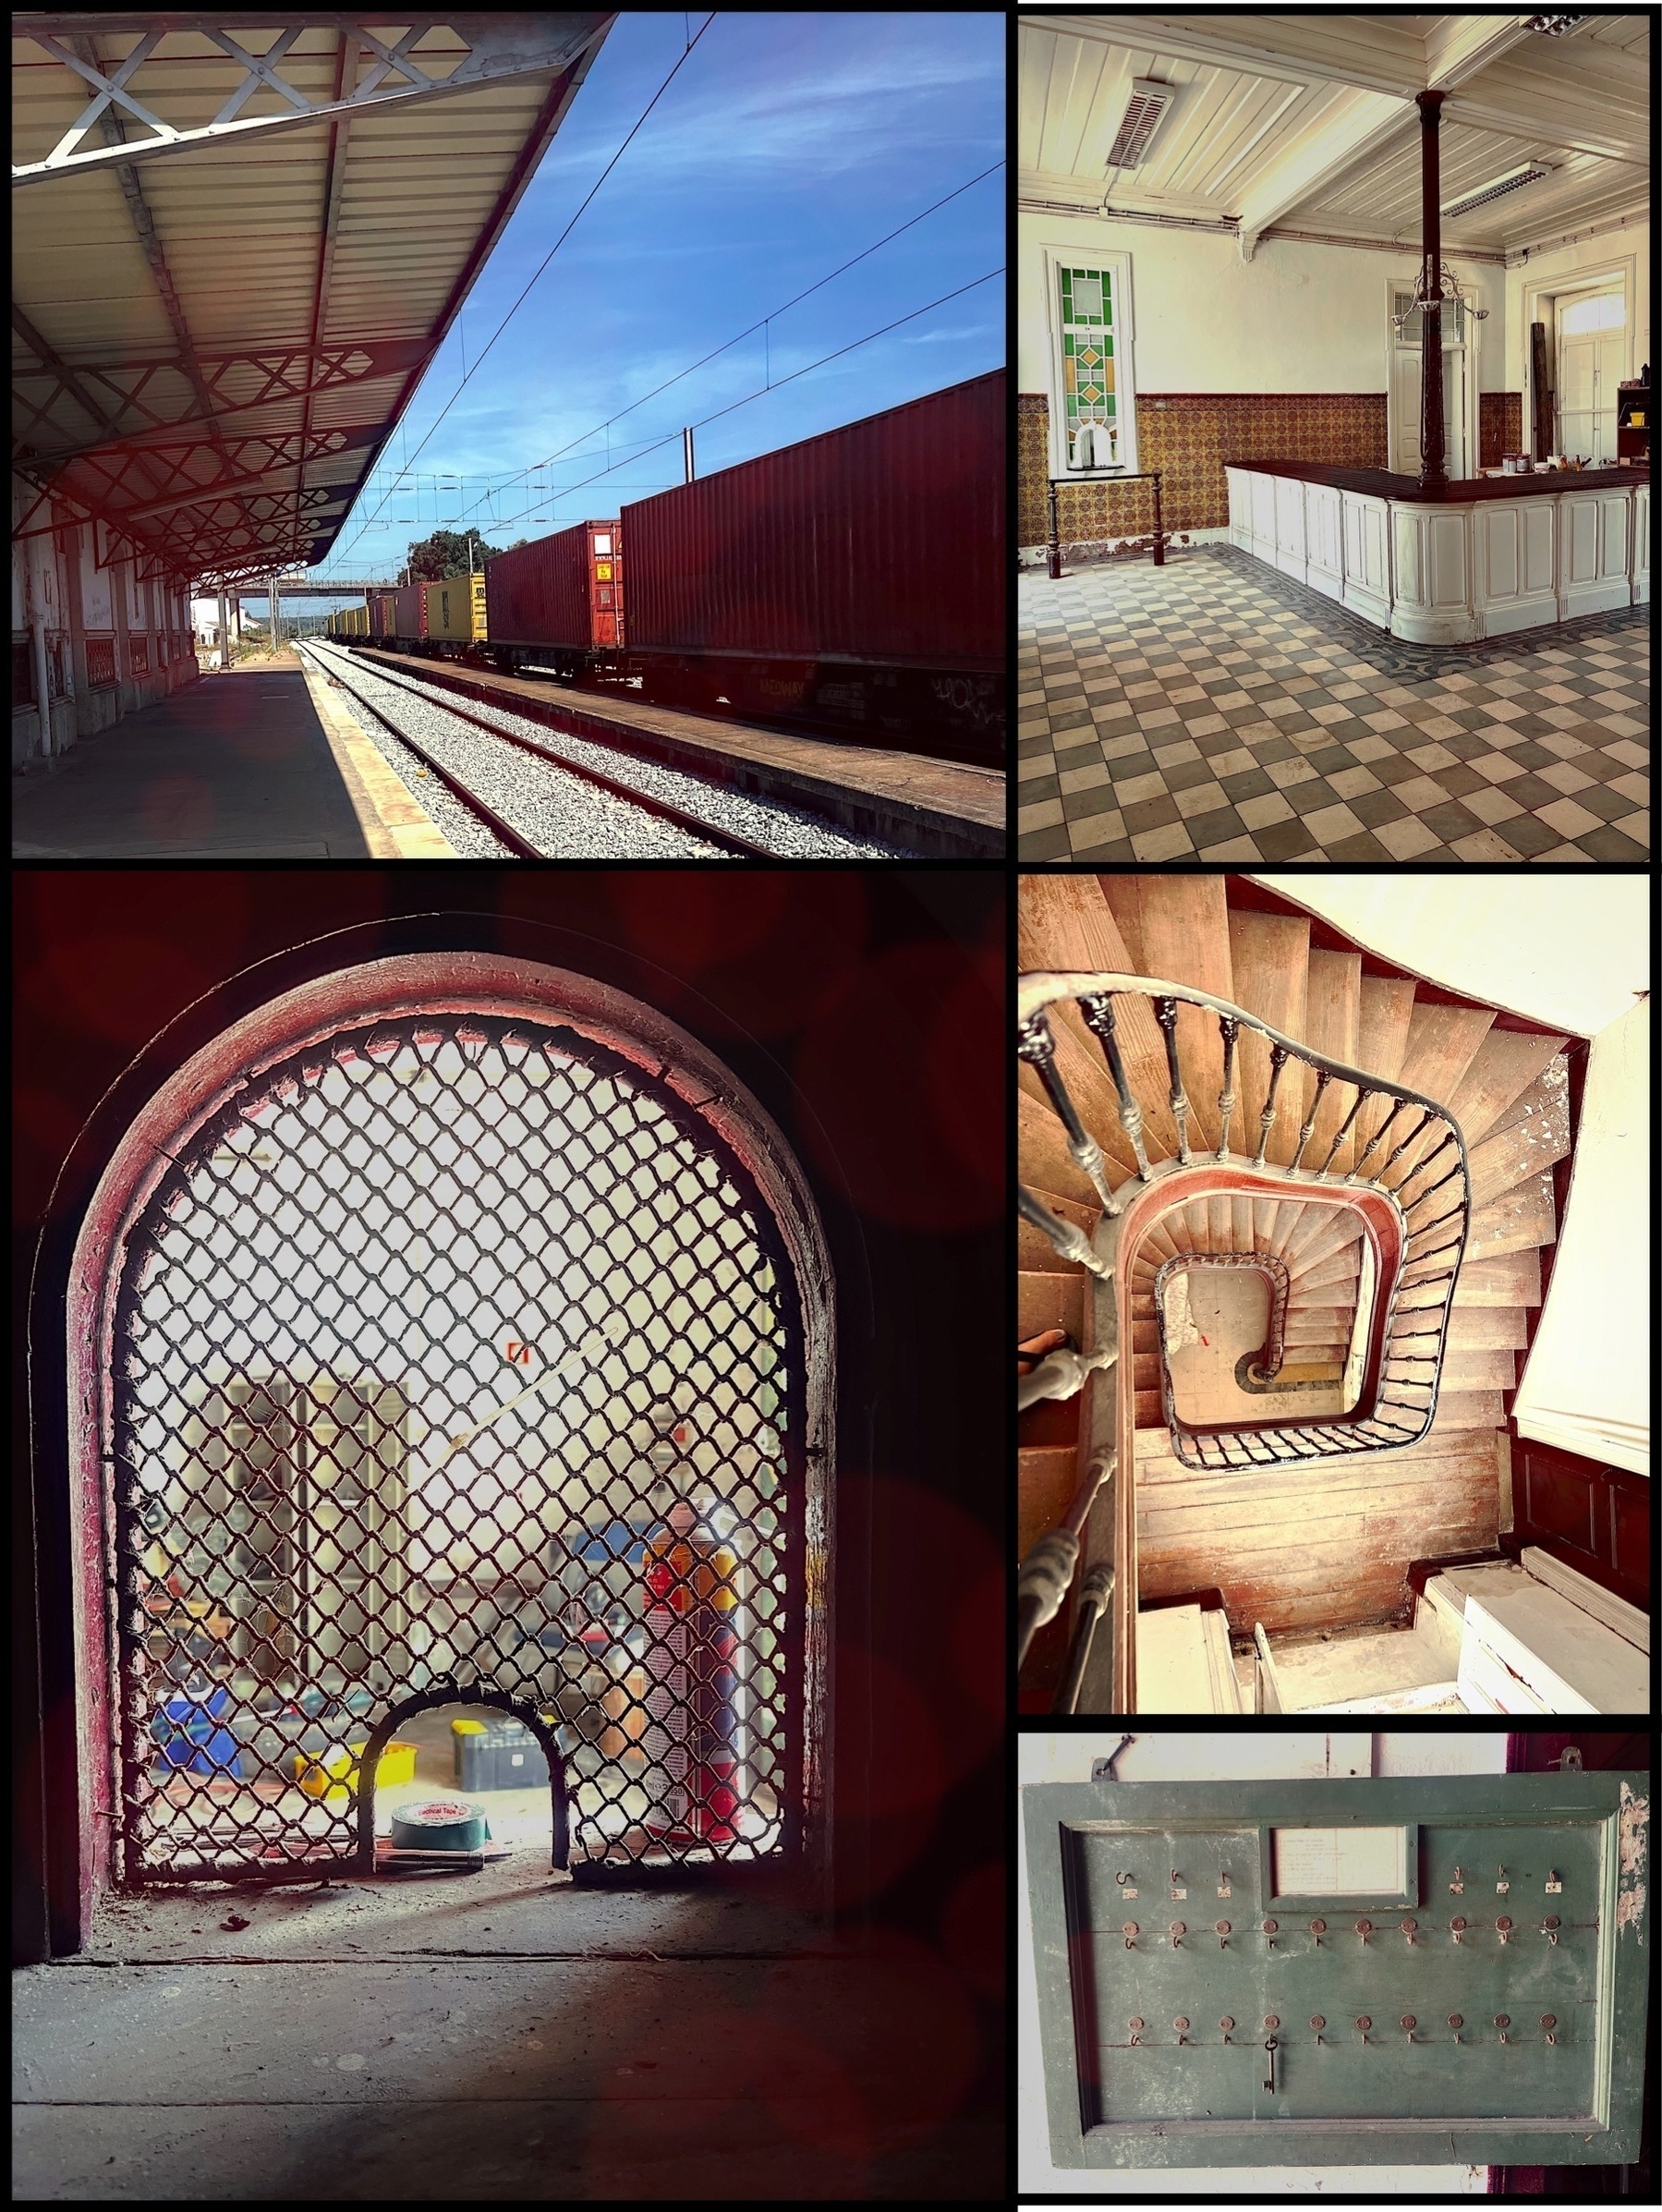 A collection of five images of the railway station at Alcácer do Sal. Photos of a goods train passing by, a curvy stair case, a key holder, a mesh ticket window and the entrance room with tiled floor and wooden counter.